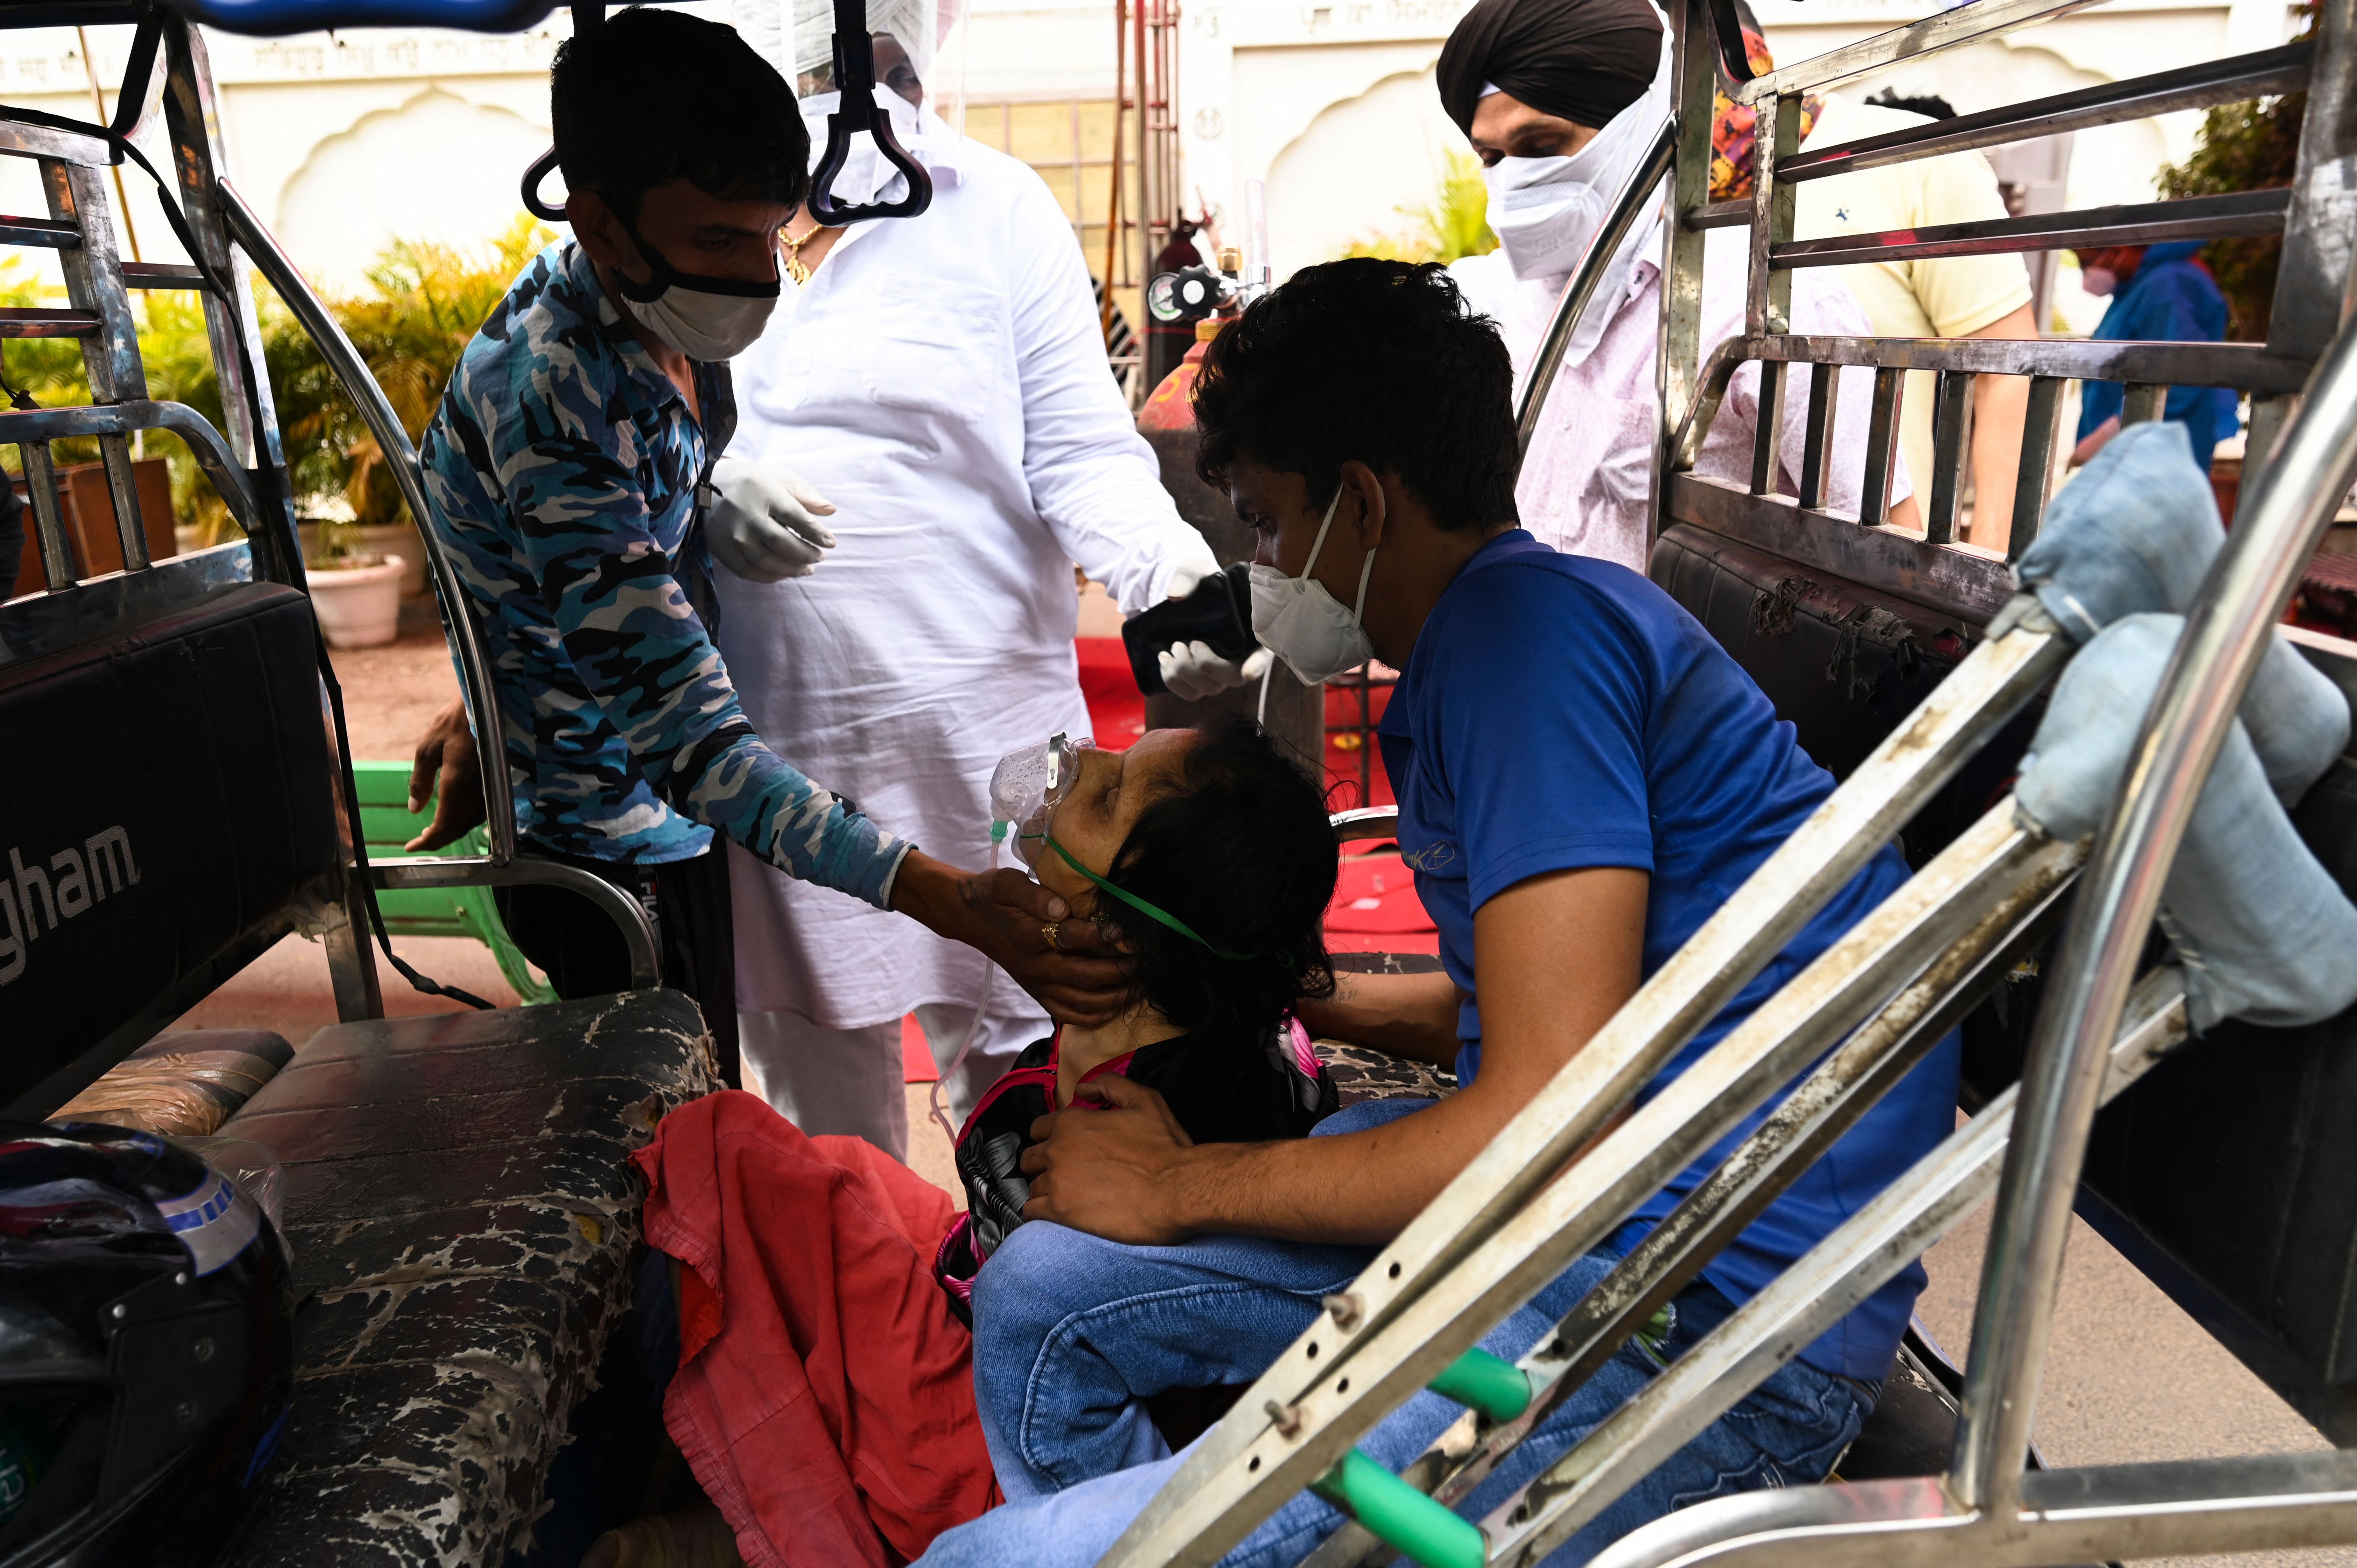 A patient struggles to breathes with the help of oxygen provided by a Gurudwara (Sikh Temple) under a tent installed along a roadside amid the Covid-19 coronavirus pandemic in Ghaziabad on May 4